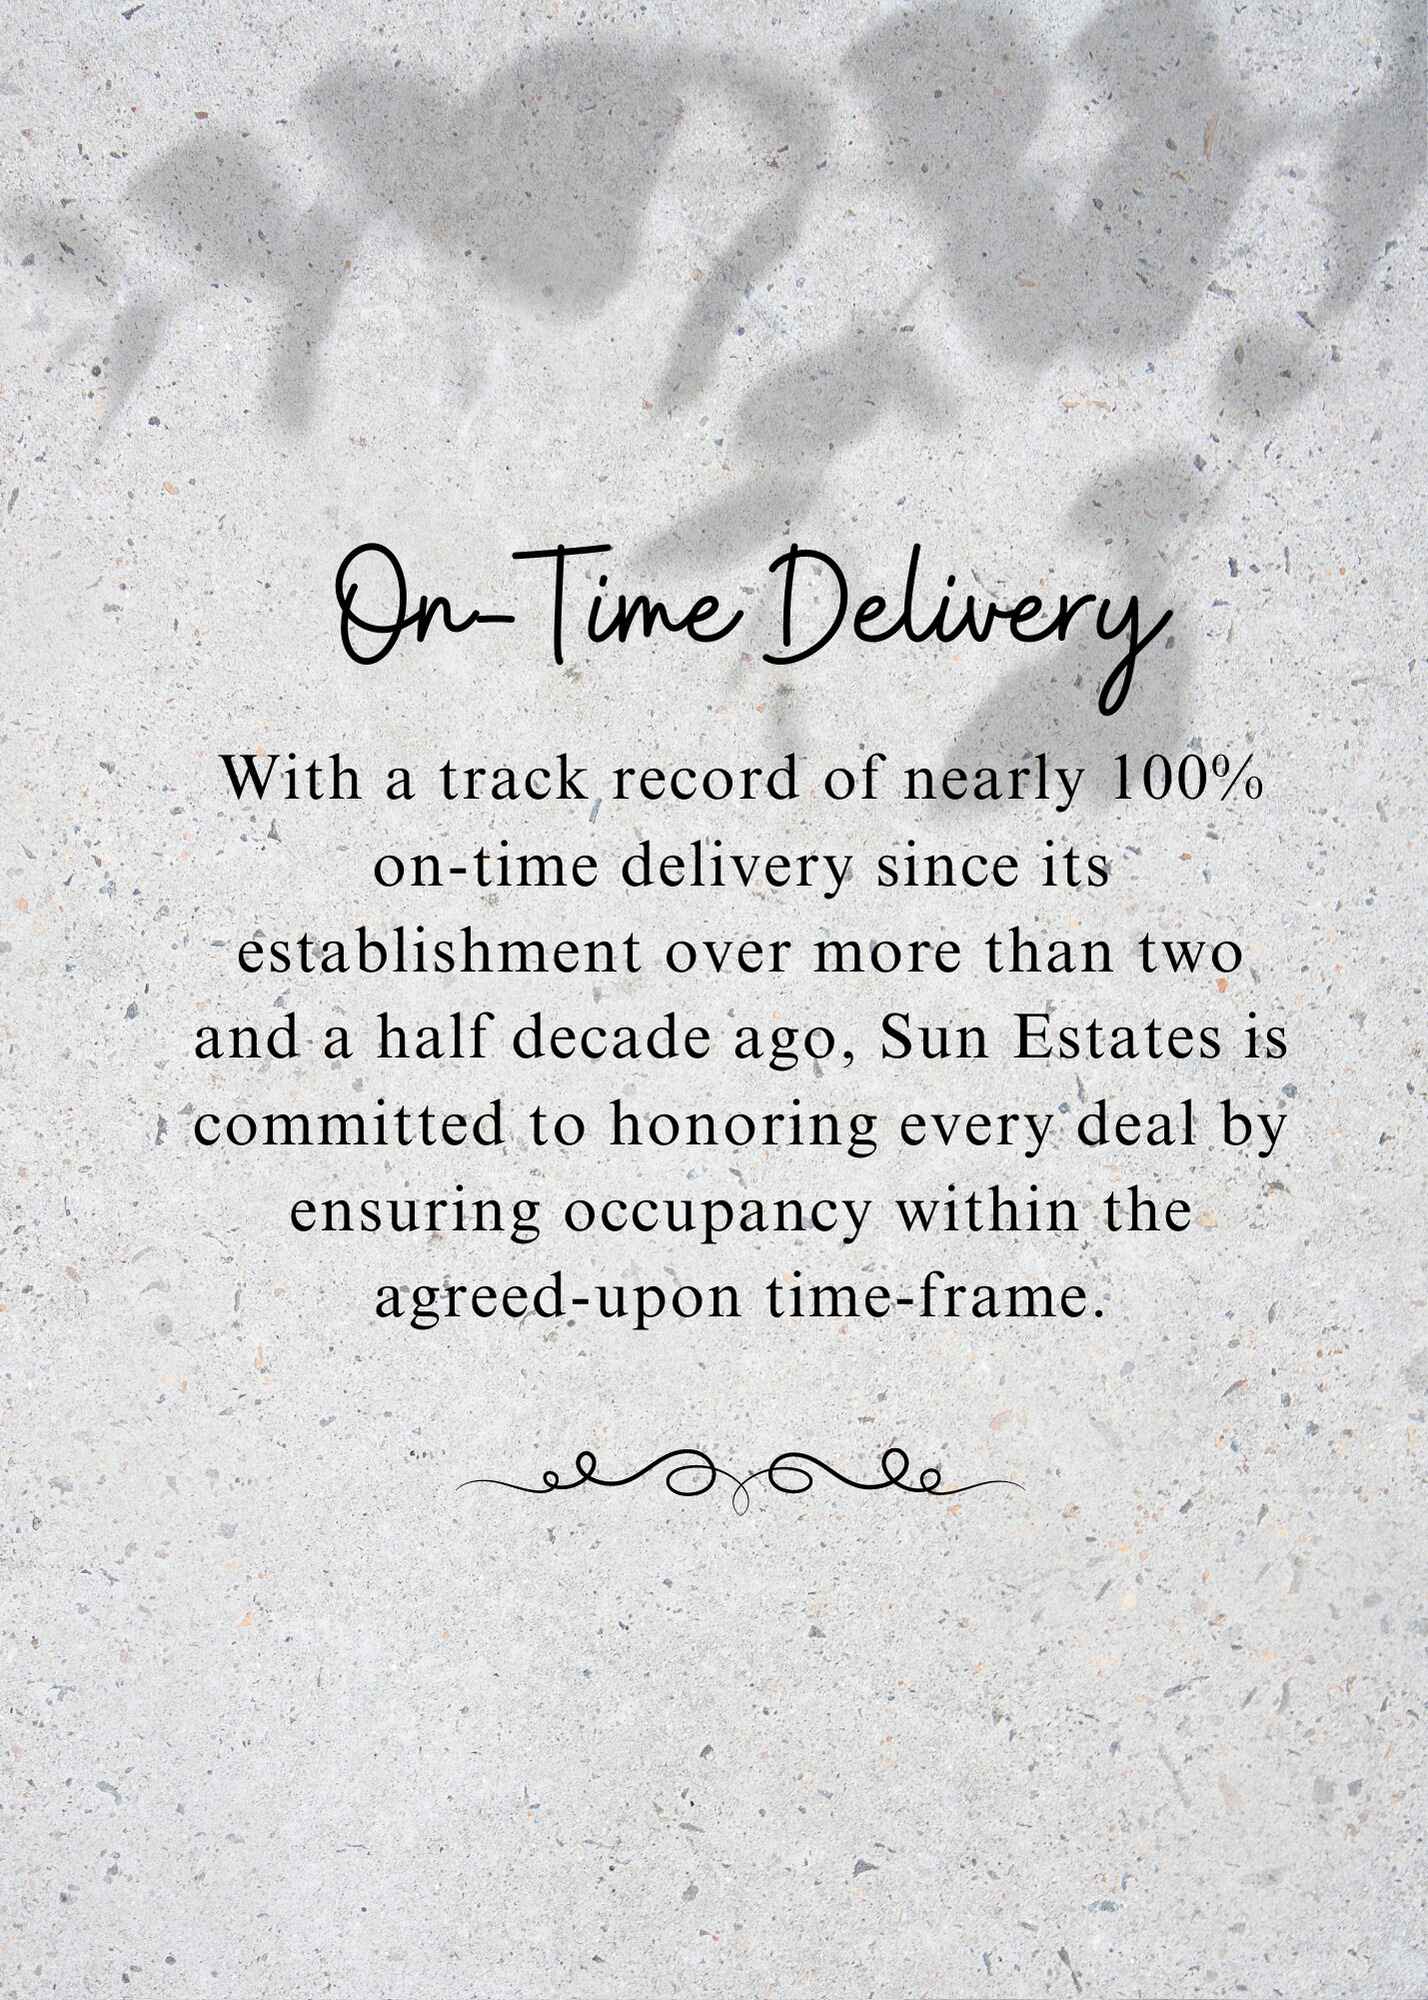 On Time Delivery - Sun Estate